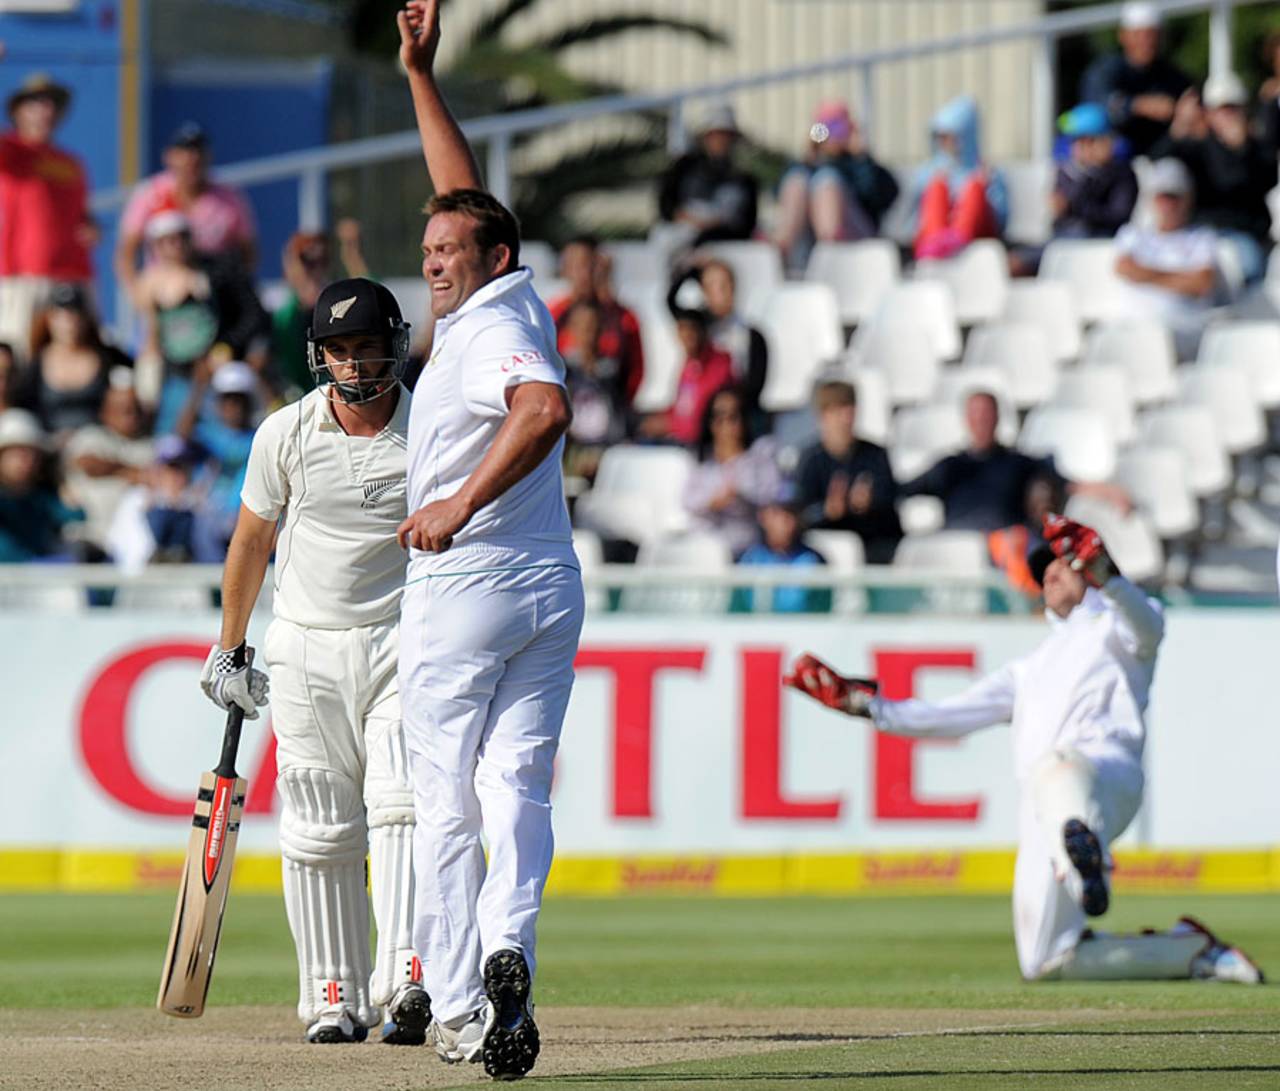 Kallis never assumed the responsibility for South Africa's bowling that Imran, Sobers and Botham did for their teams&nbsp;&nbsp;&bull;&nbsp;&nbsp;AFP